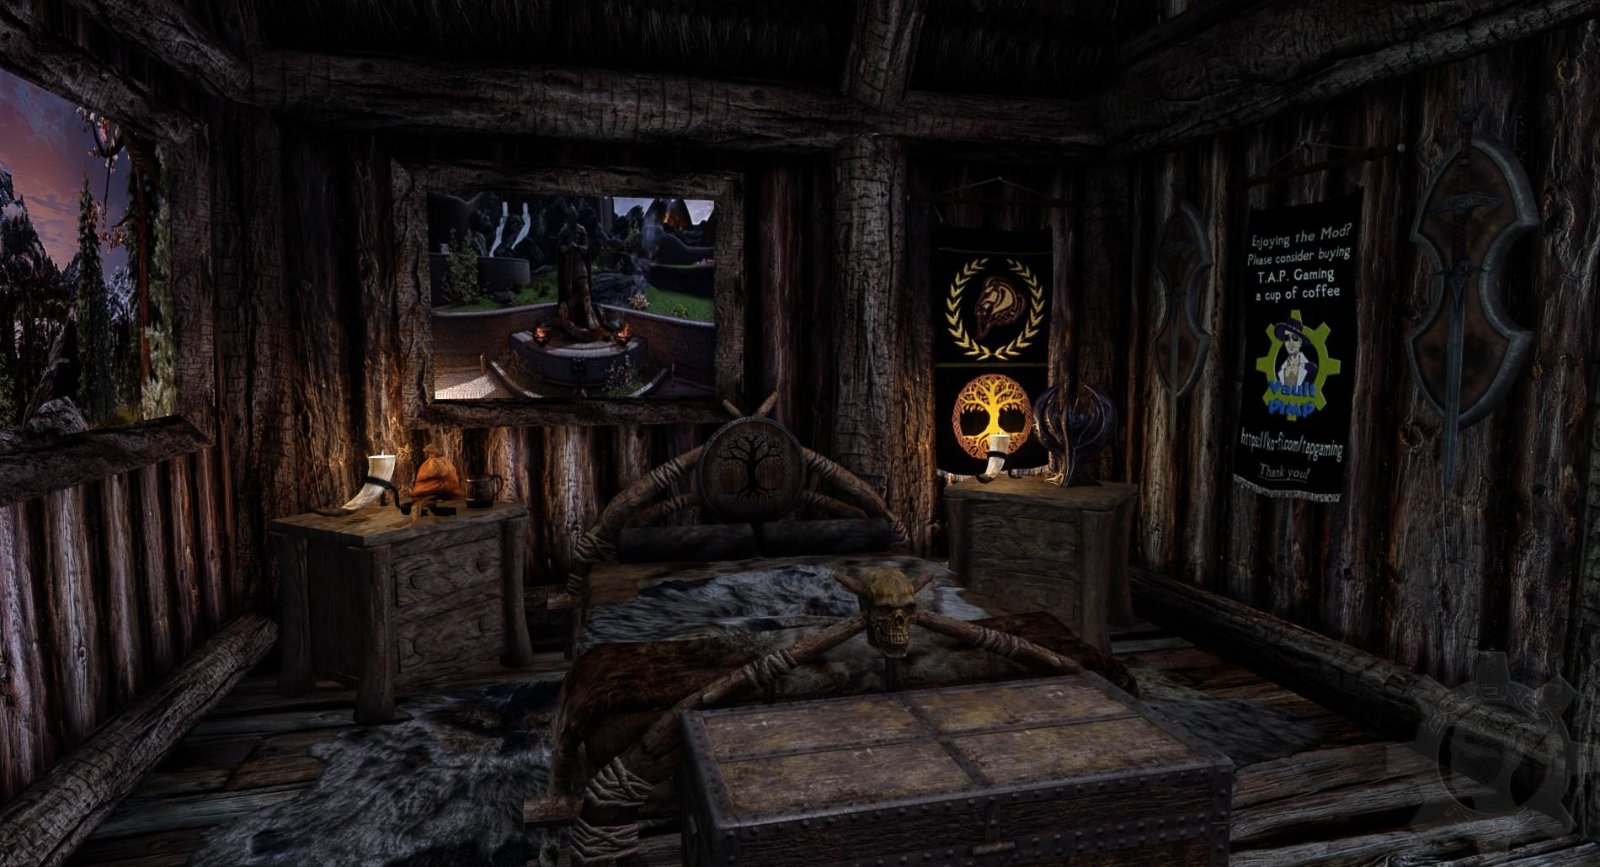 Bethesda Game Studios on X: Meet the Modder! This month we sat down with  PossessedLemon who specializes in large-scale dungeons and player homes mods  for #Skyrim. Check out the full story here